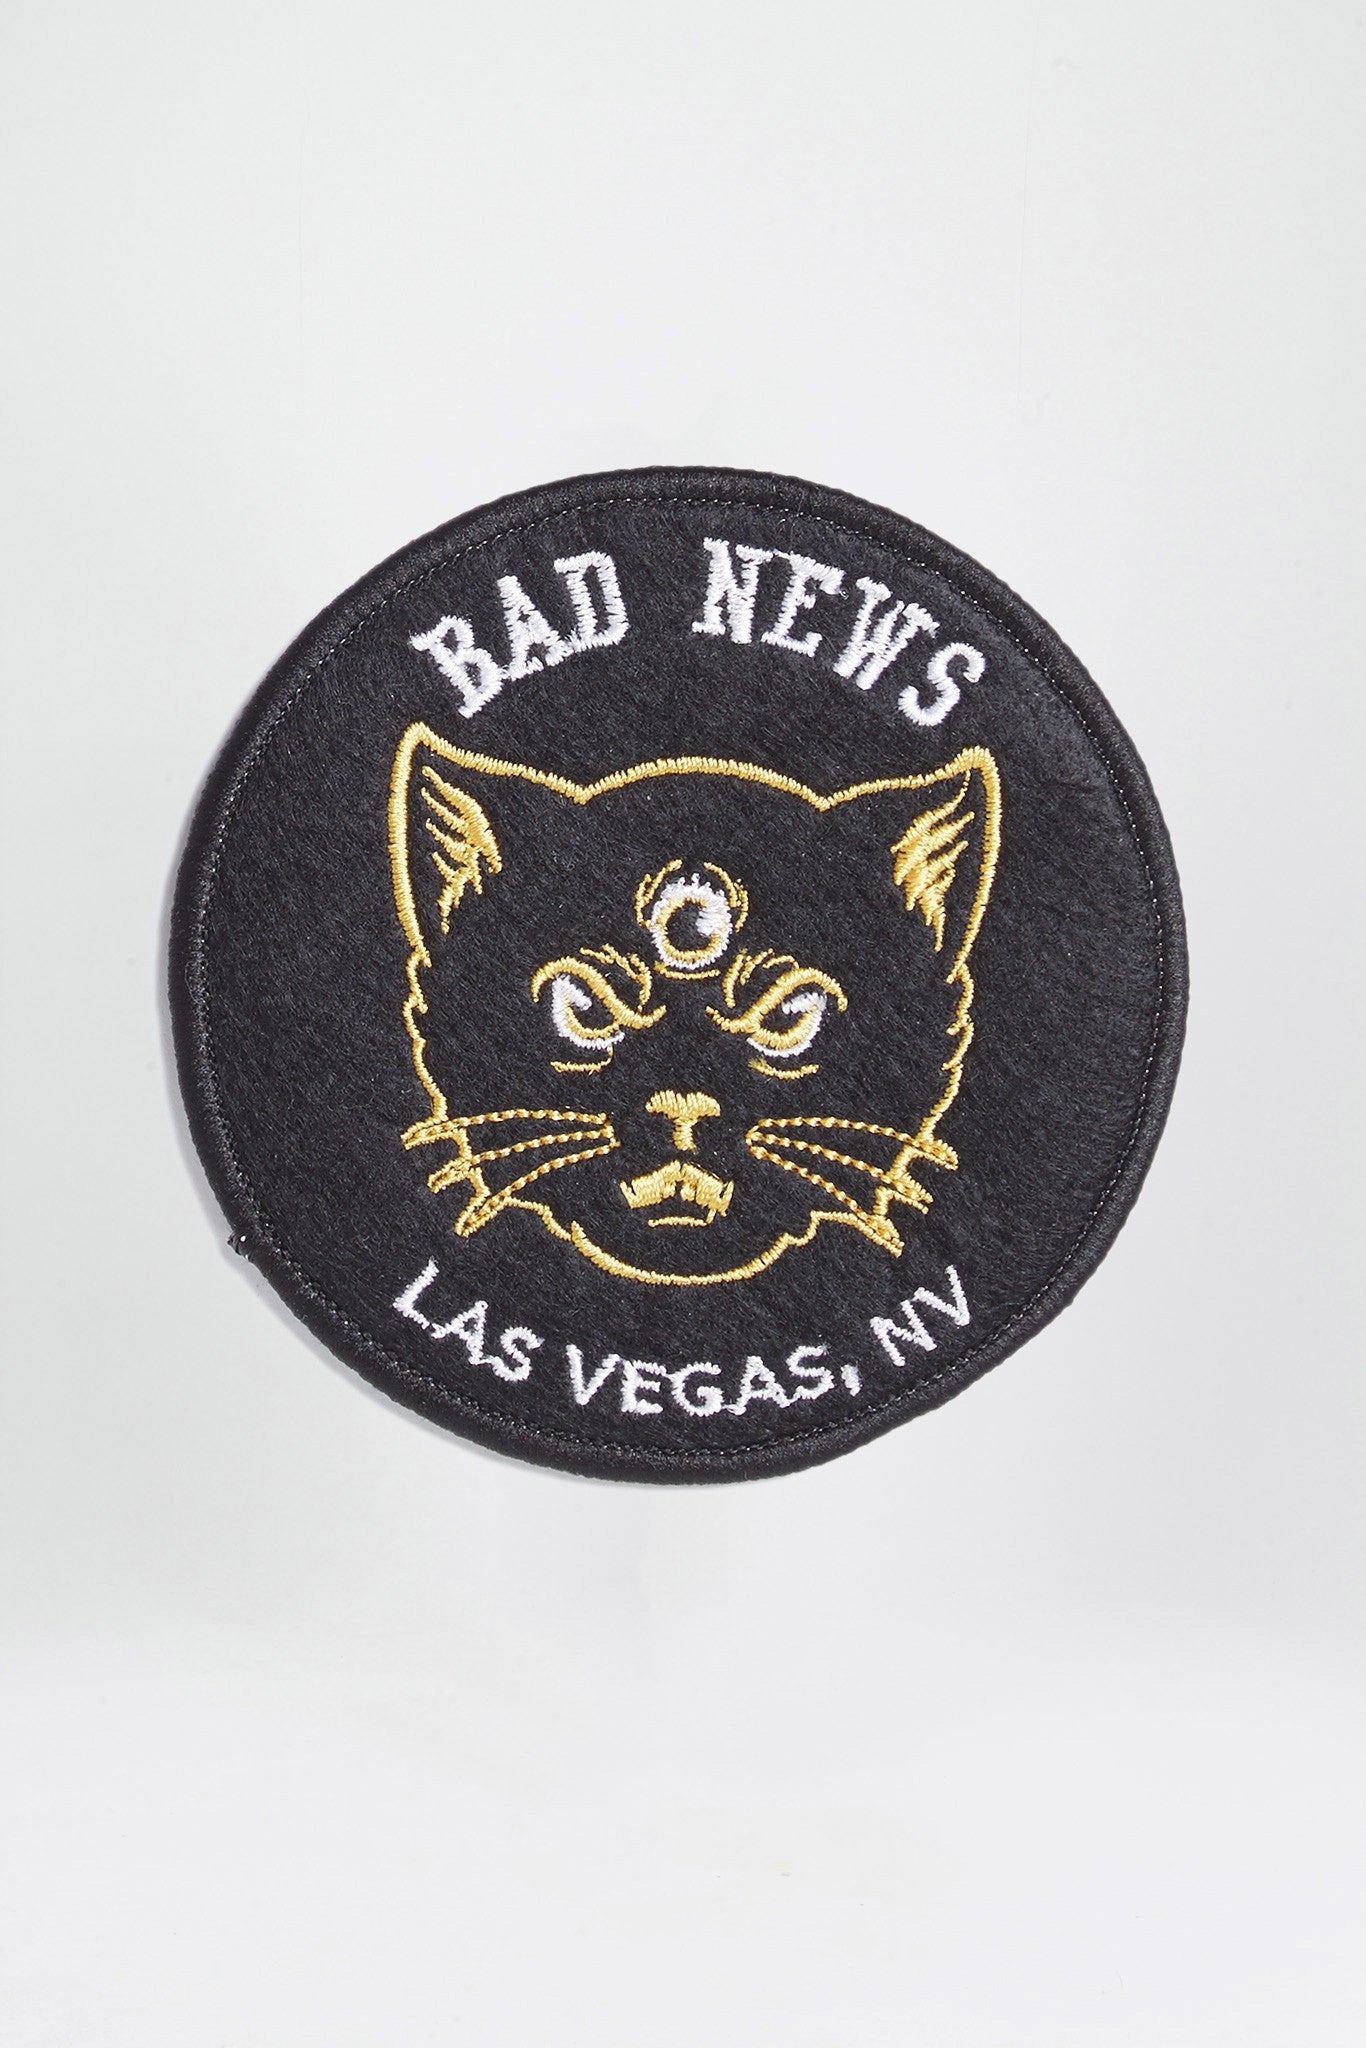 Bad News embroidered velcro patch.